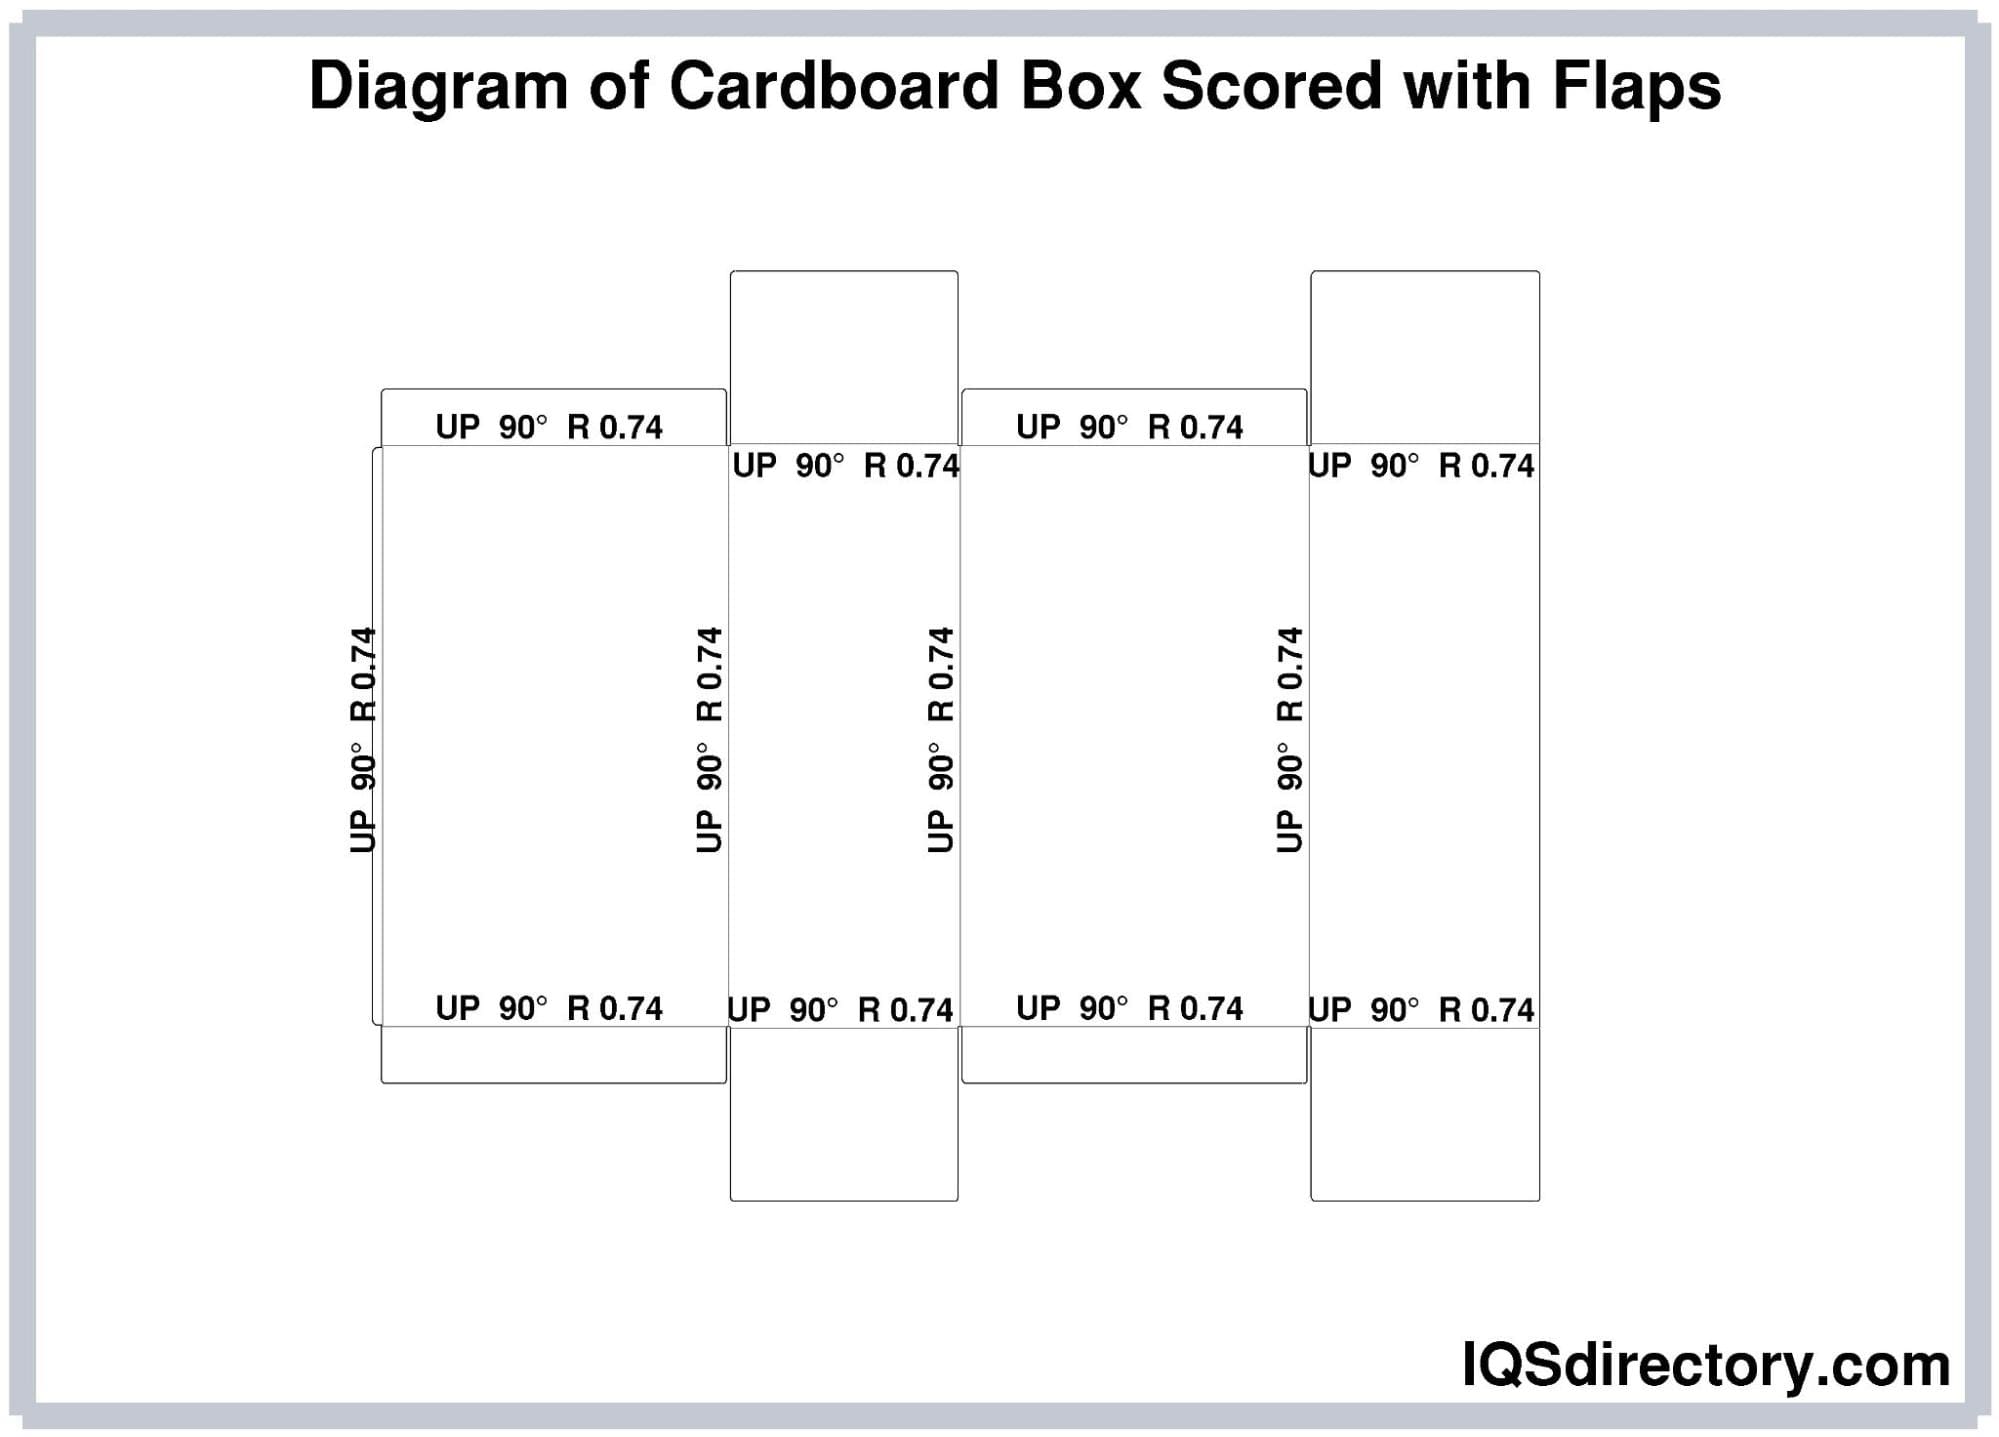 Diagram of Cardboard Box Scored with Flaps